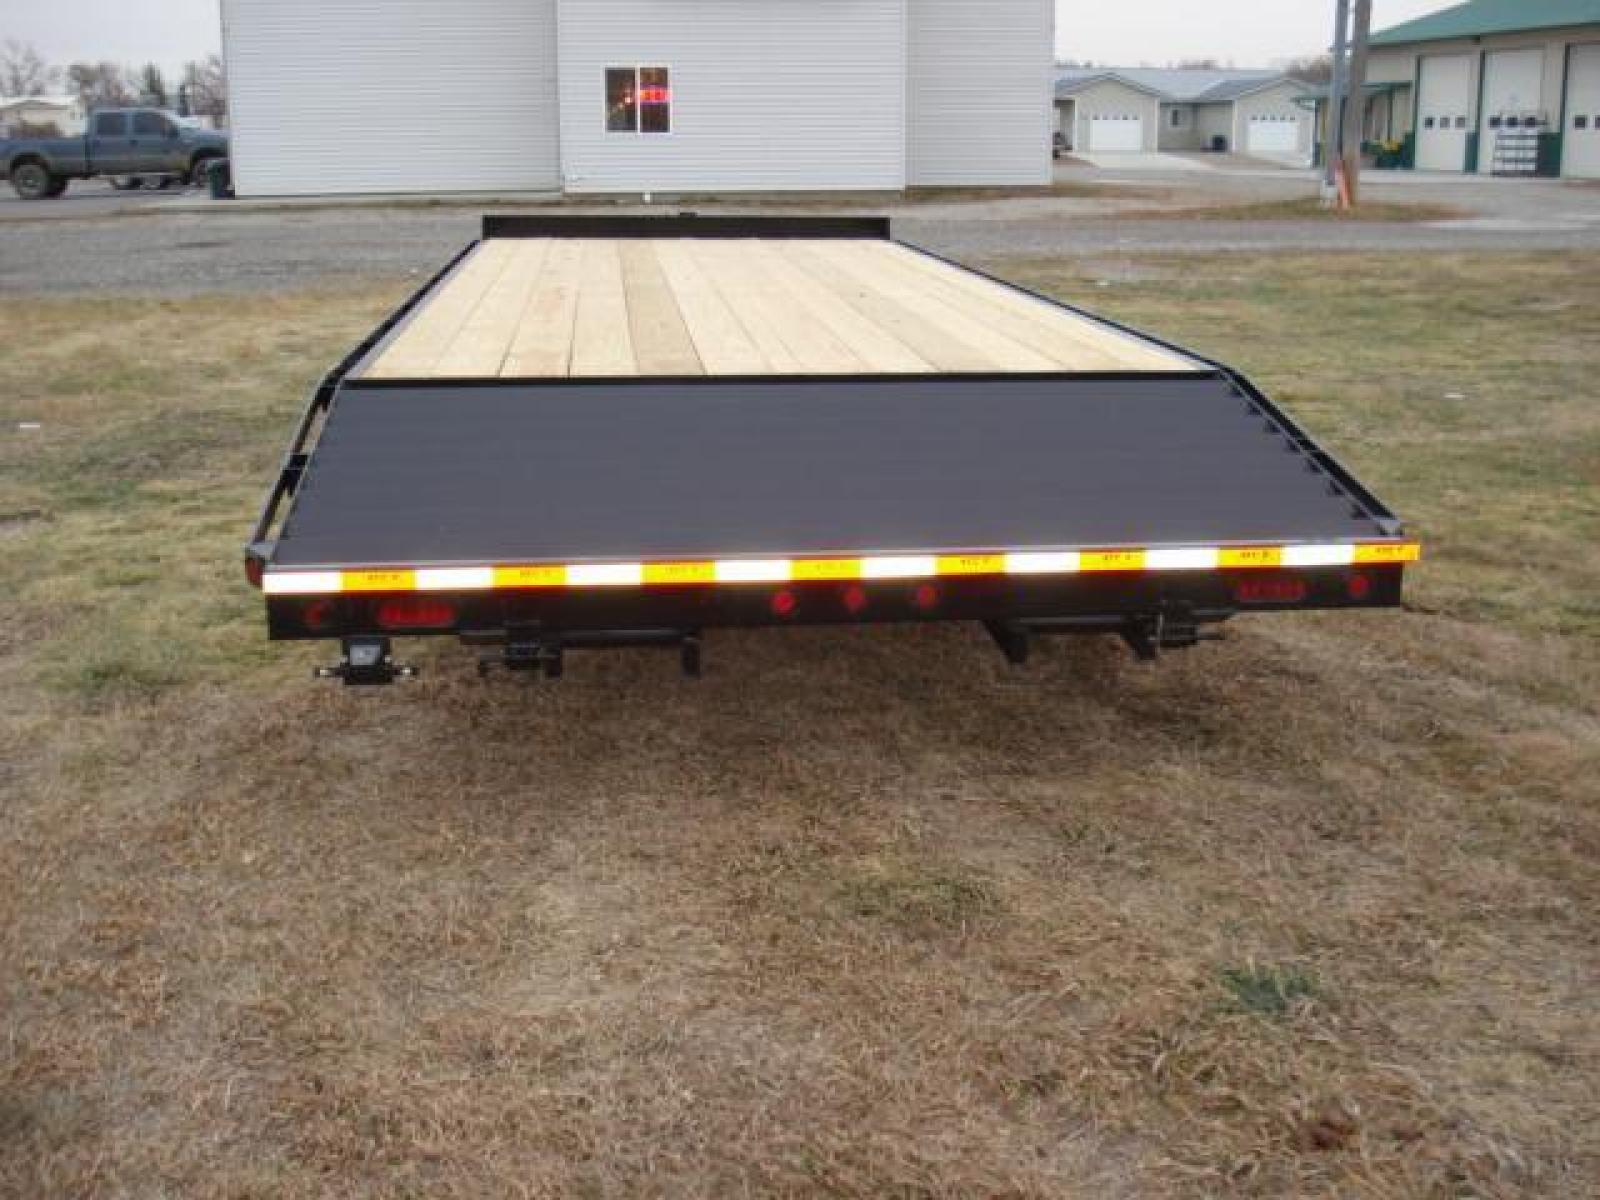 2022 Black DCT 81/2 x 20 + 4 Deckover Equip , located at 310 West 1st Ave, Big Timber, MT, 59011, (406) 860-8510, 45.833511, -109.957809 - DCT 81/2 X 20 + 4 DECKOVER BUMPER-PULL EQUIPMENT TRAILER, 4' DOVETAIL, 14K GVW, 2 - 7K AXLES W- EZ LUBE HUBS, HD SLIPPER SPRING SUSPENSION, 16"-10 PLY TIRES, 16" ON CENTER CROSS MEMBERS, LED LIGHTS, TREATED DECK, REAR RAMPS, 2-5-16 ADJUSTABLE COUPLER, 12K DROP FOOT JACK, STAKE POCKETS-RUB RAIL. T - Photo #4